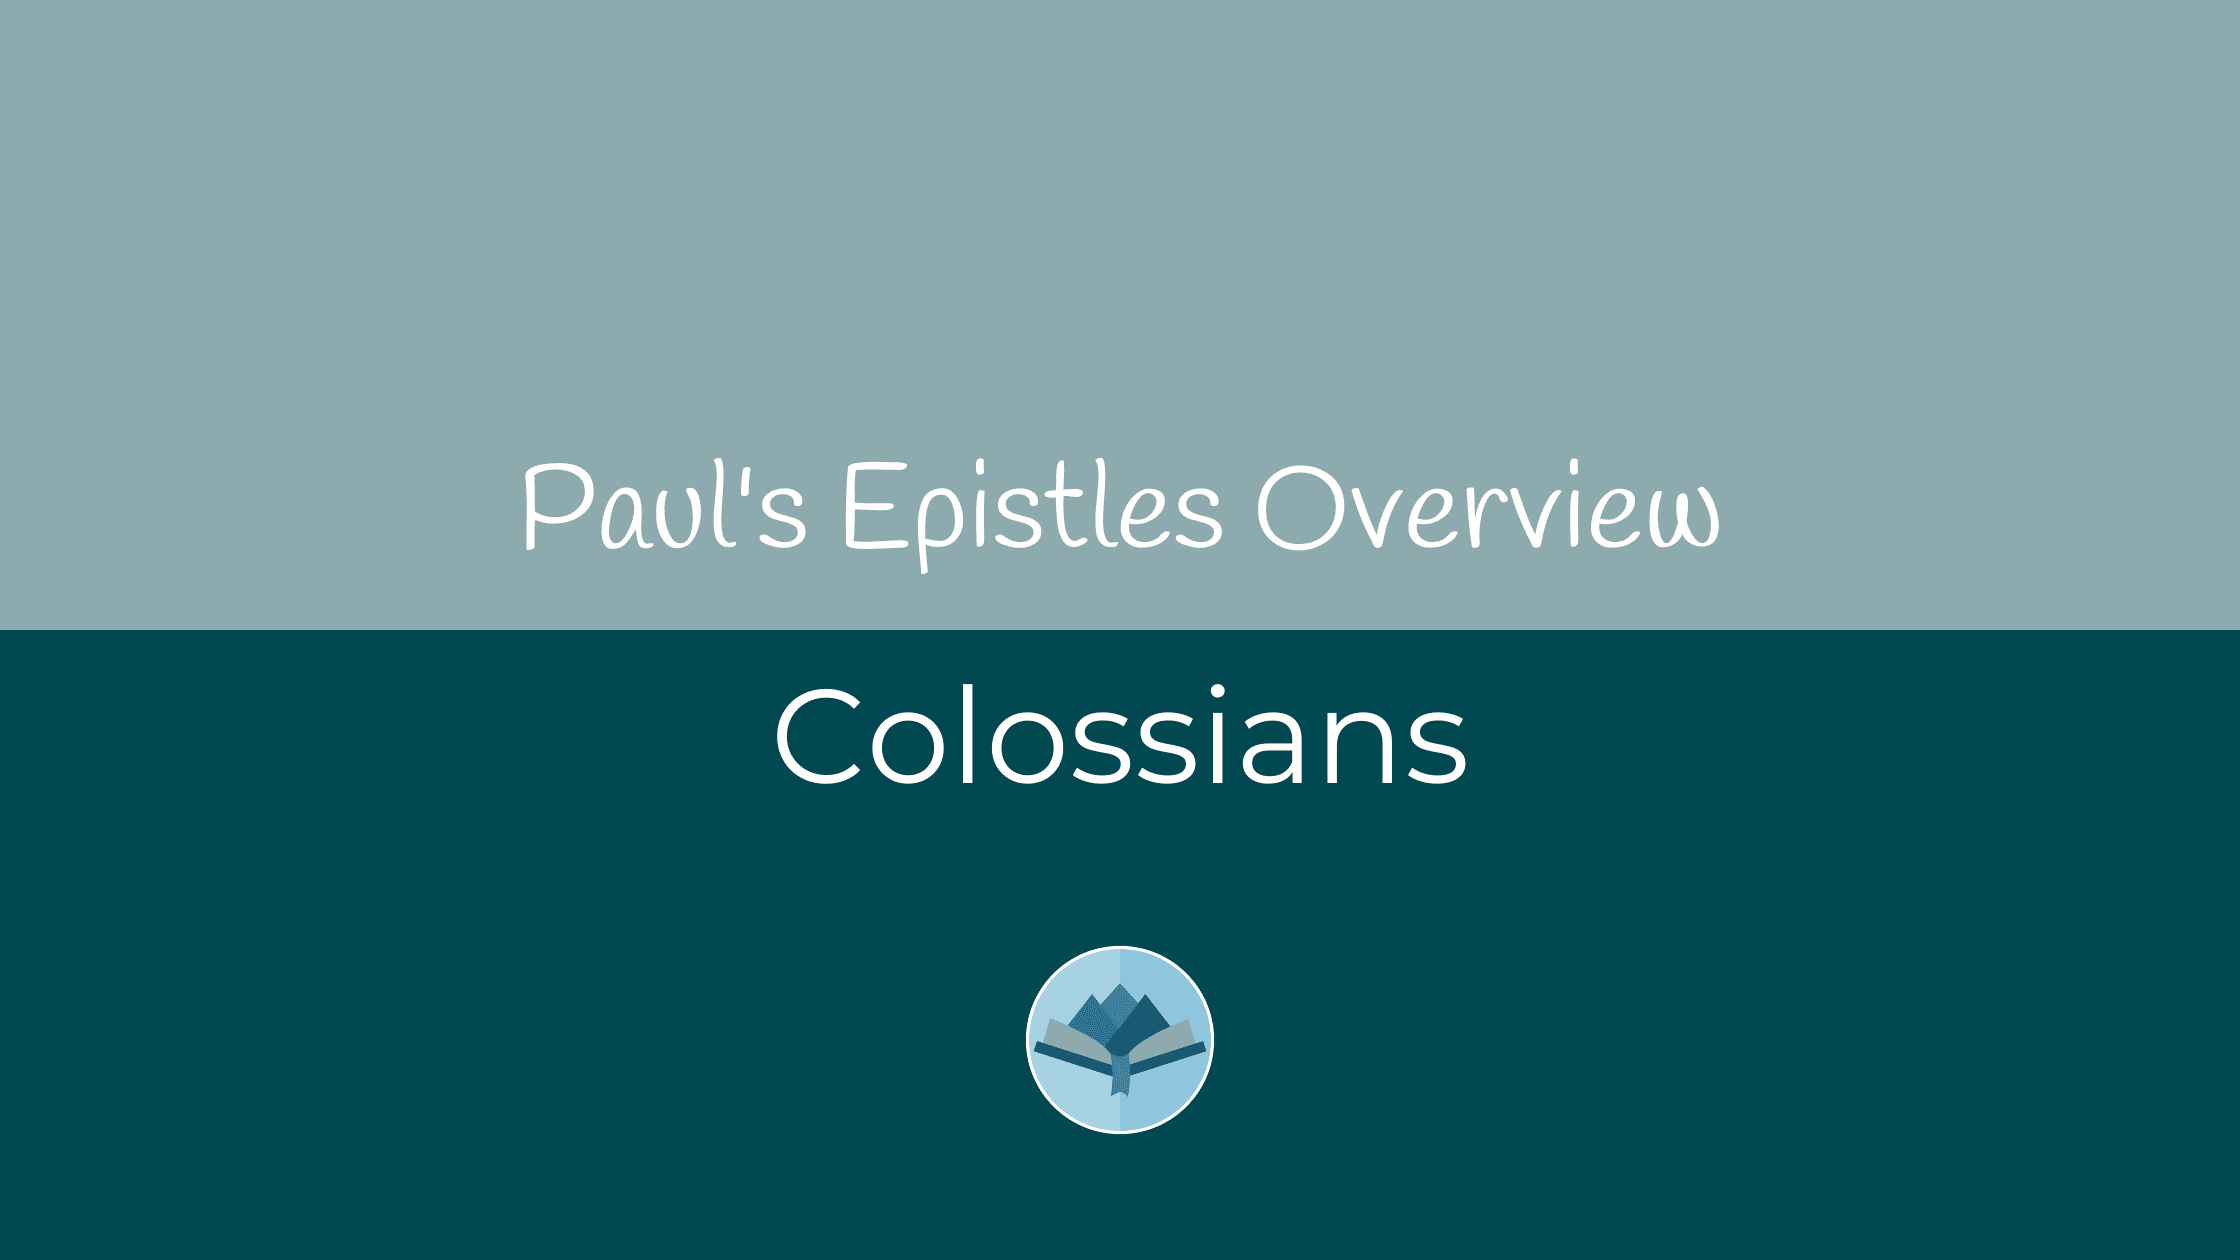 Colossians Overview